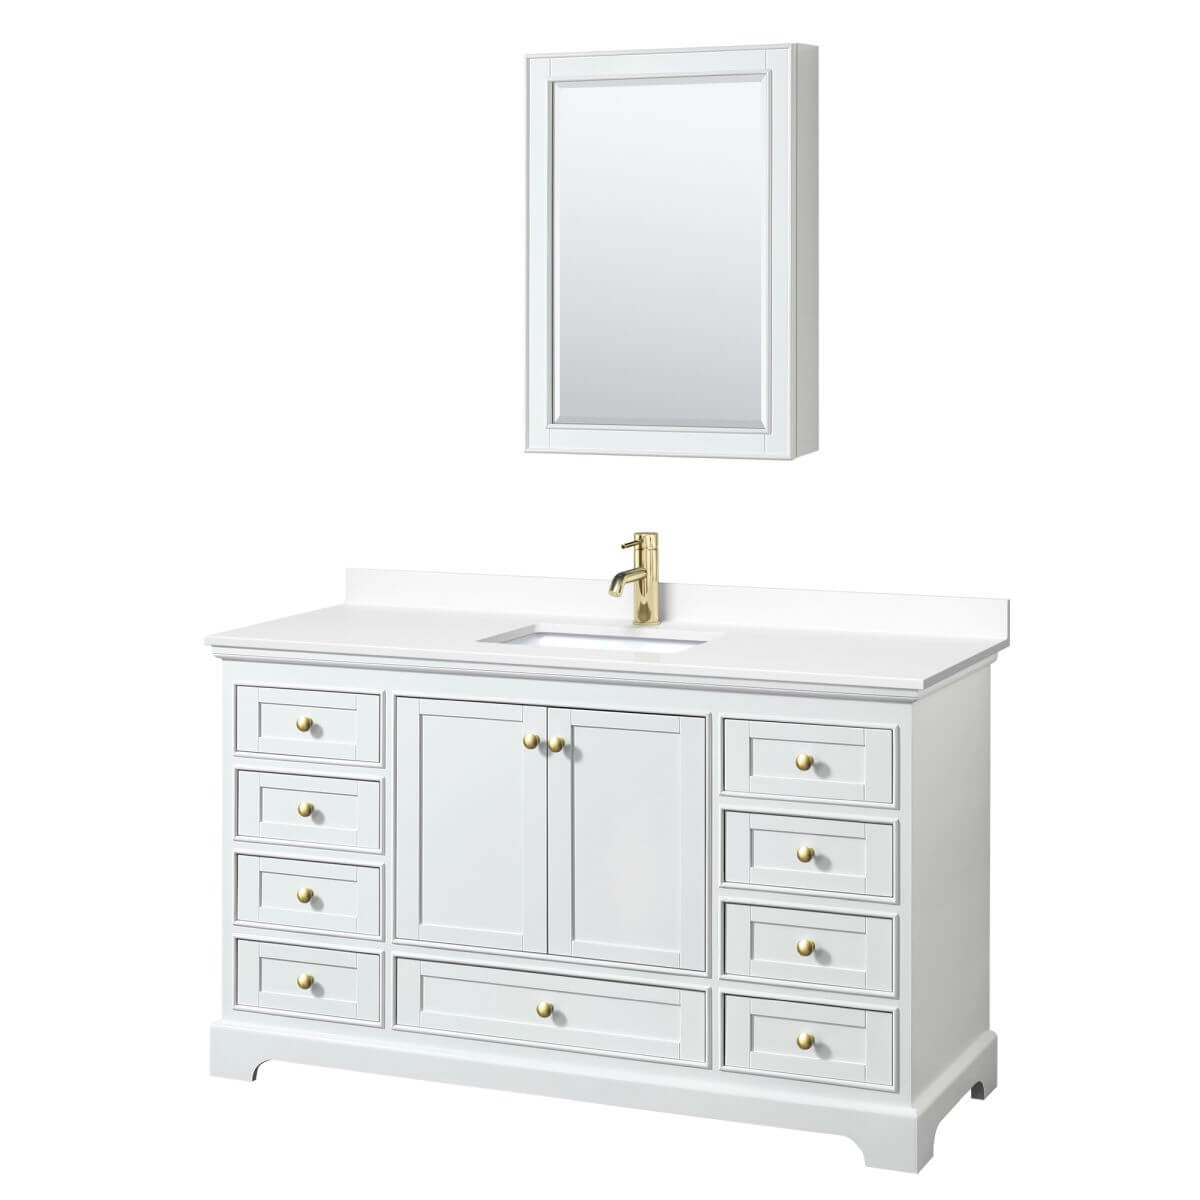 Wyndham Collection Deborah 60 inch Single Bathroom Vanity in White with White Cultured Marble Countertop, Undermount Square Sink, Brushed Gold Trim and Medicine Cabinet - WCS202060SWGWCUNSMED